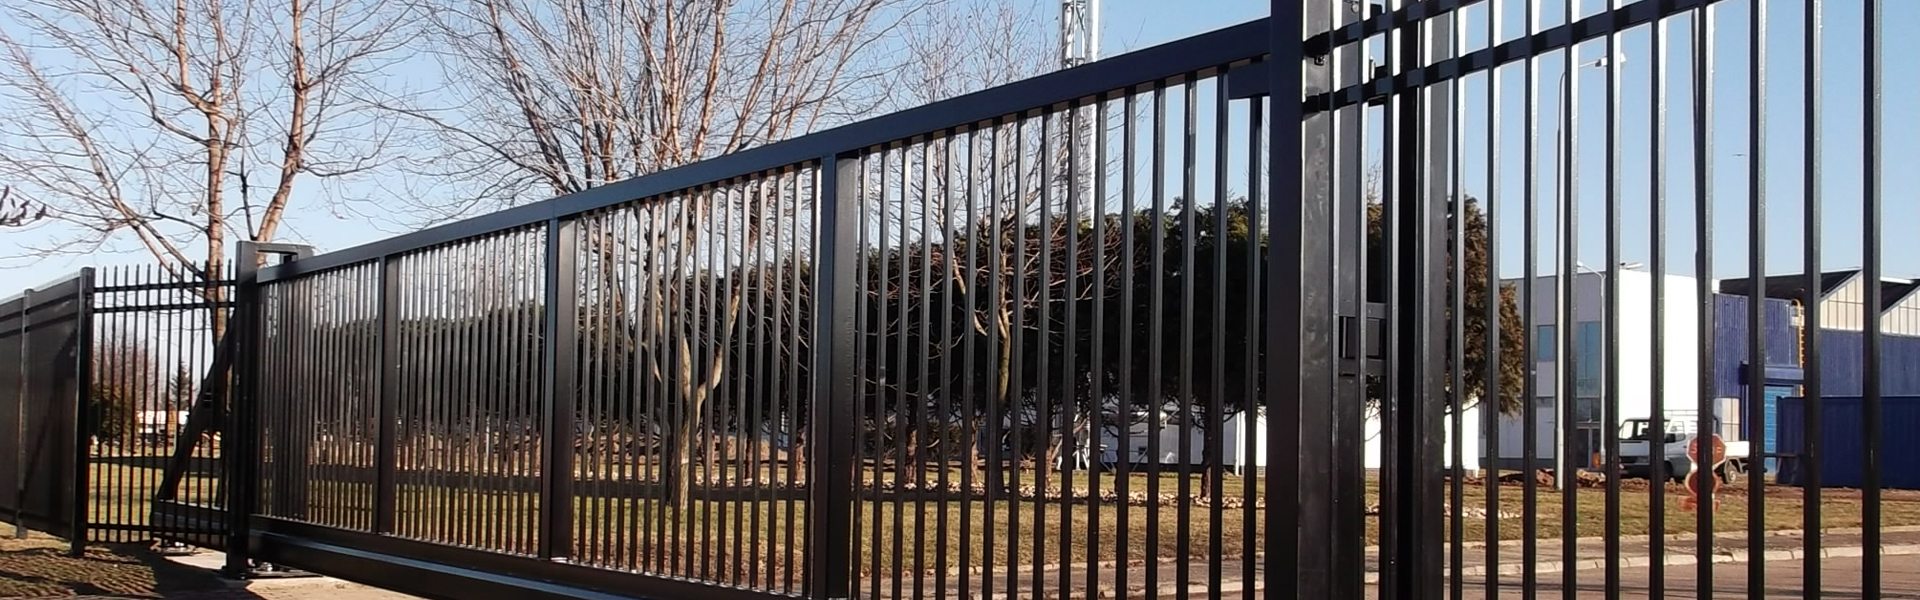 Fences for sports facilities